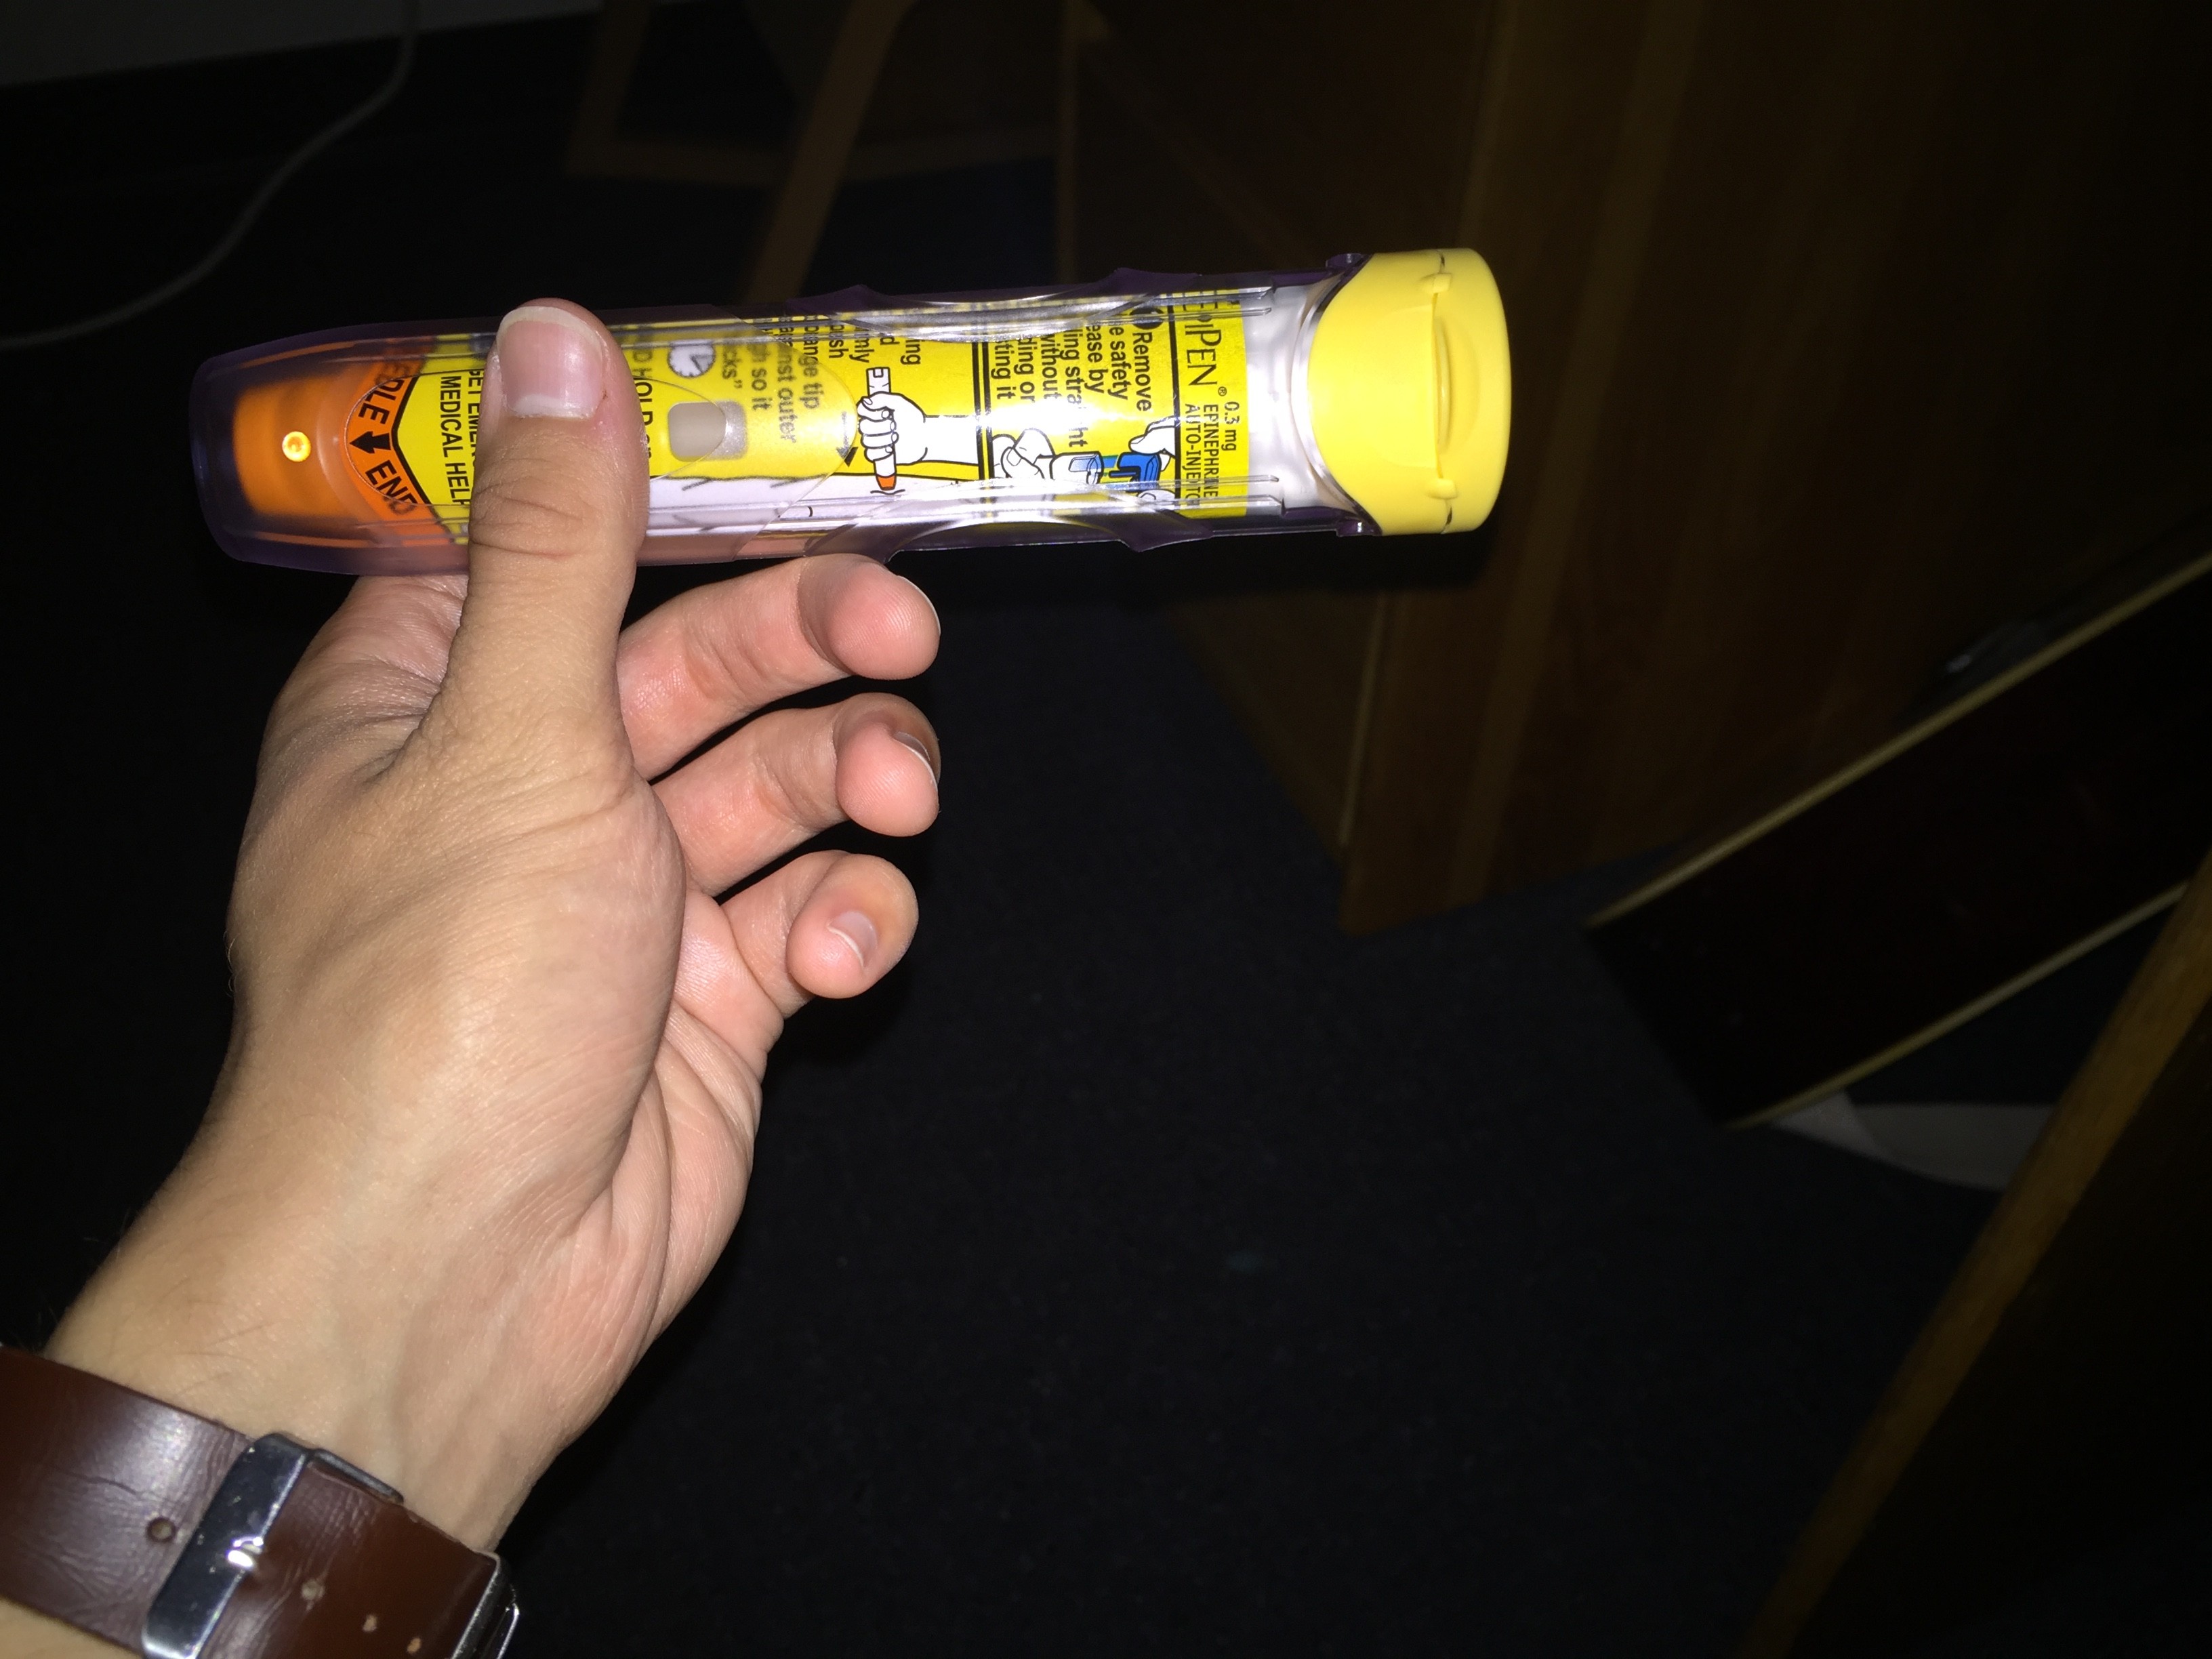 I Will Blame Capitalism For My Overpriced EpiPen, Thank You Very Much